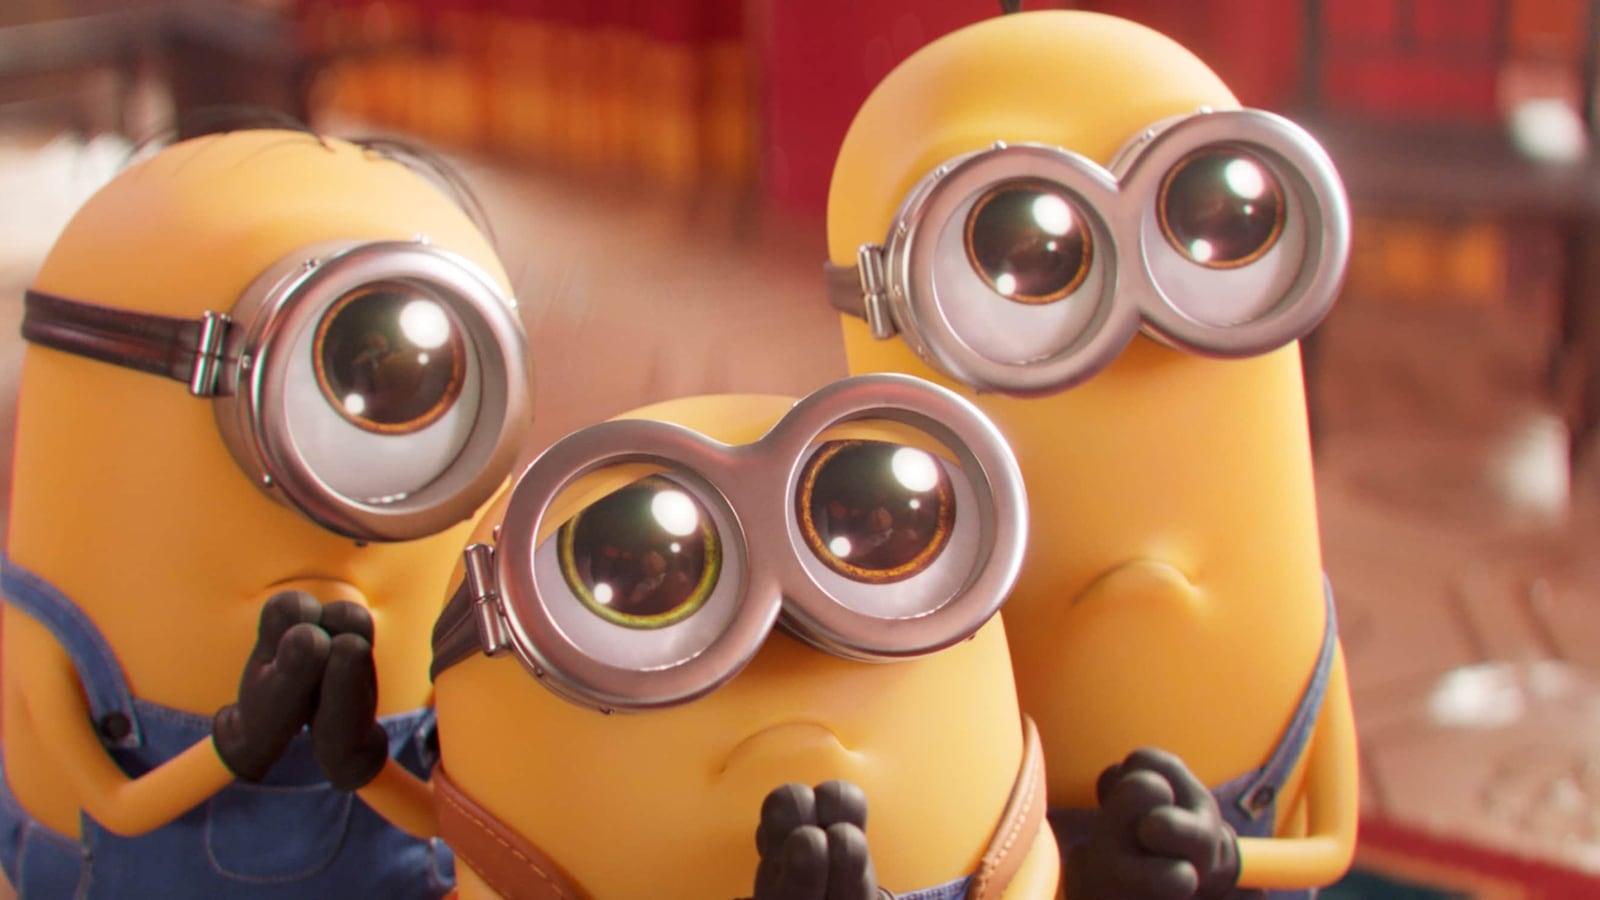 Minions: The Rise of Gru's ending changed in China. Here's why ...